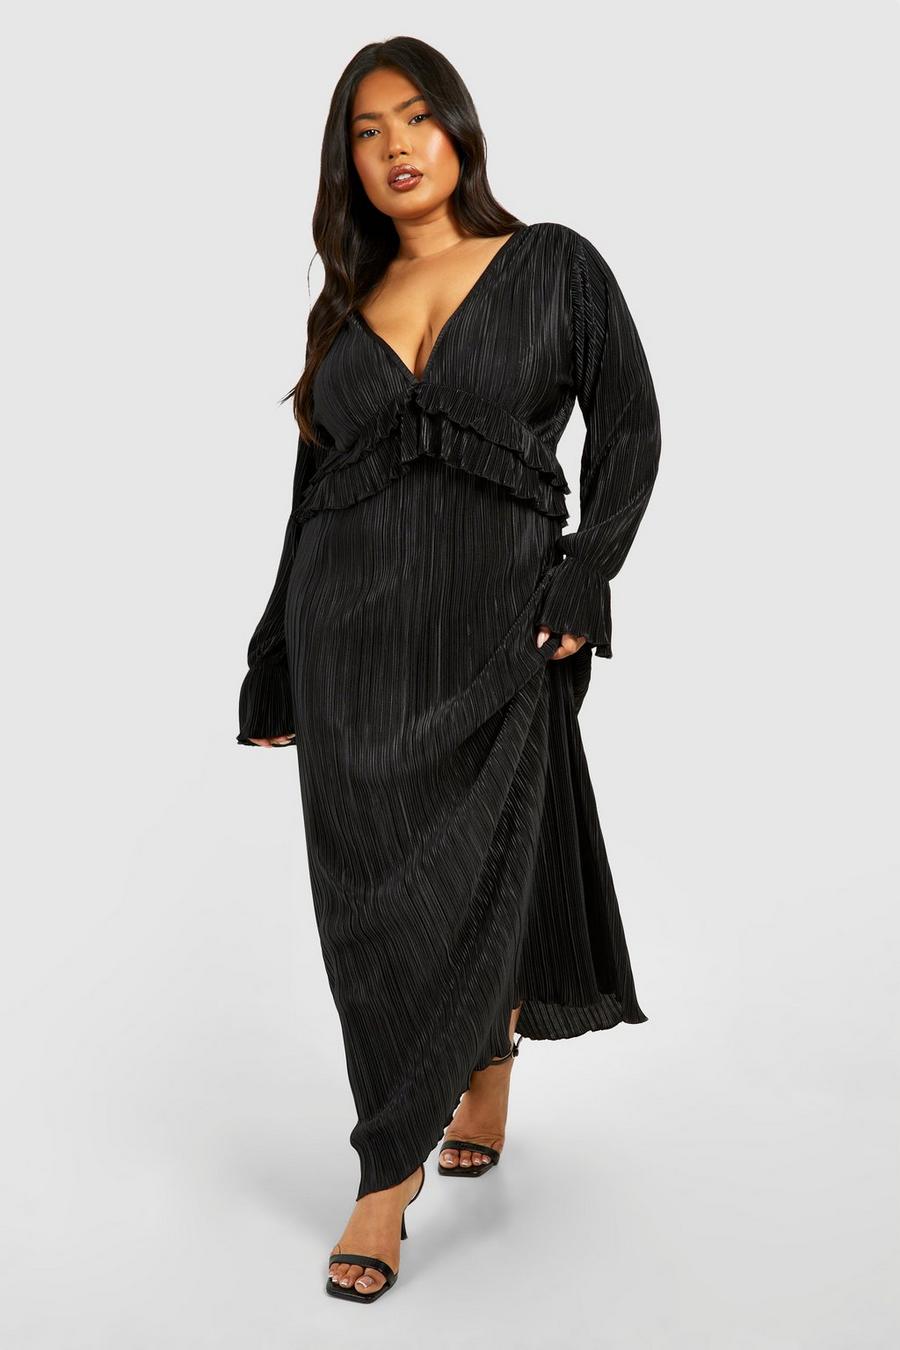 Plus Size Going Out Outfits, Plus Size Party Wear